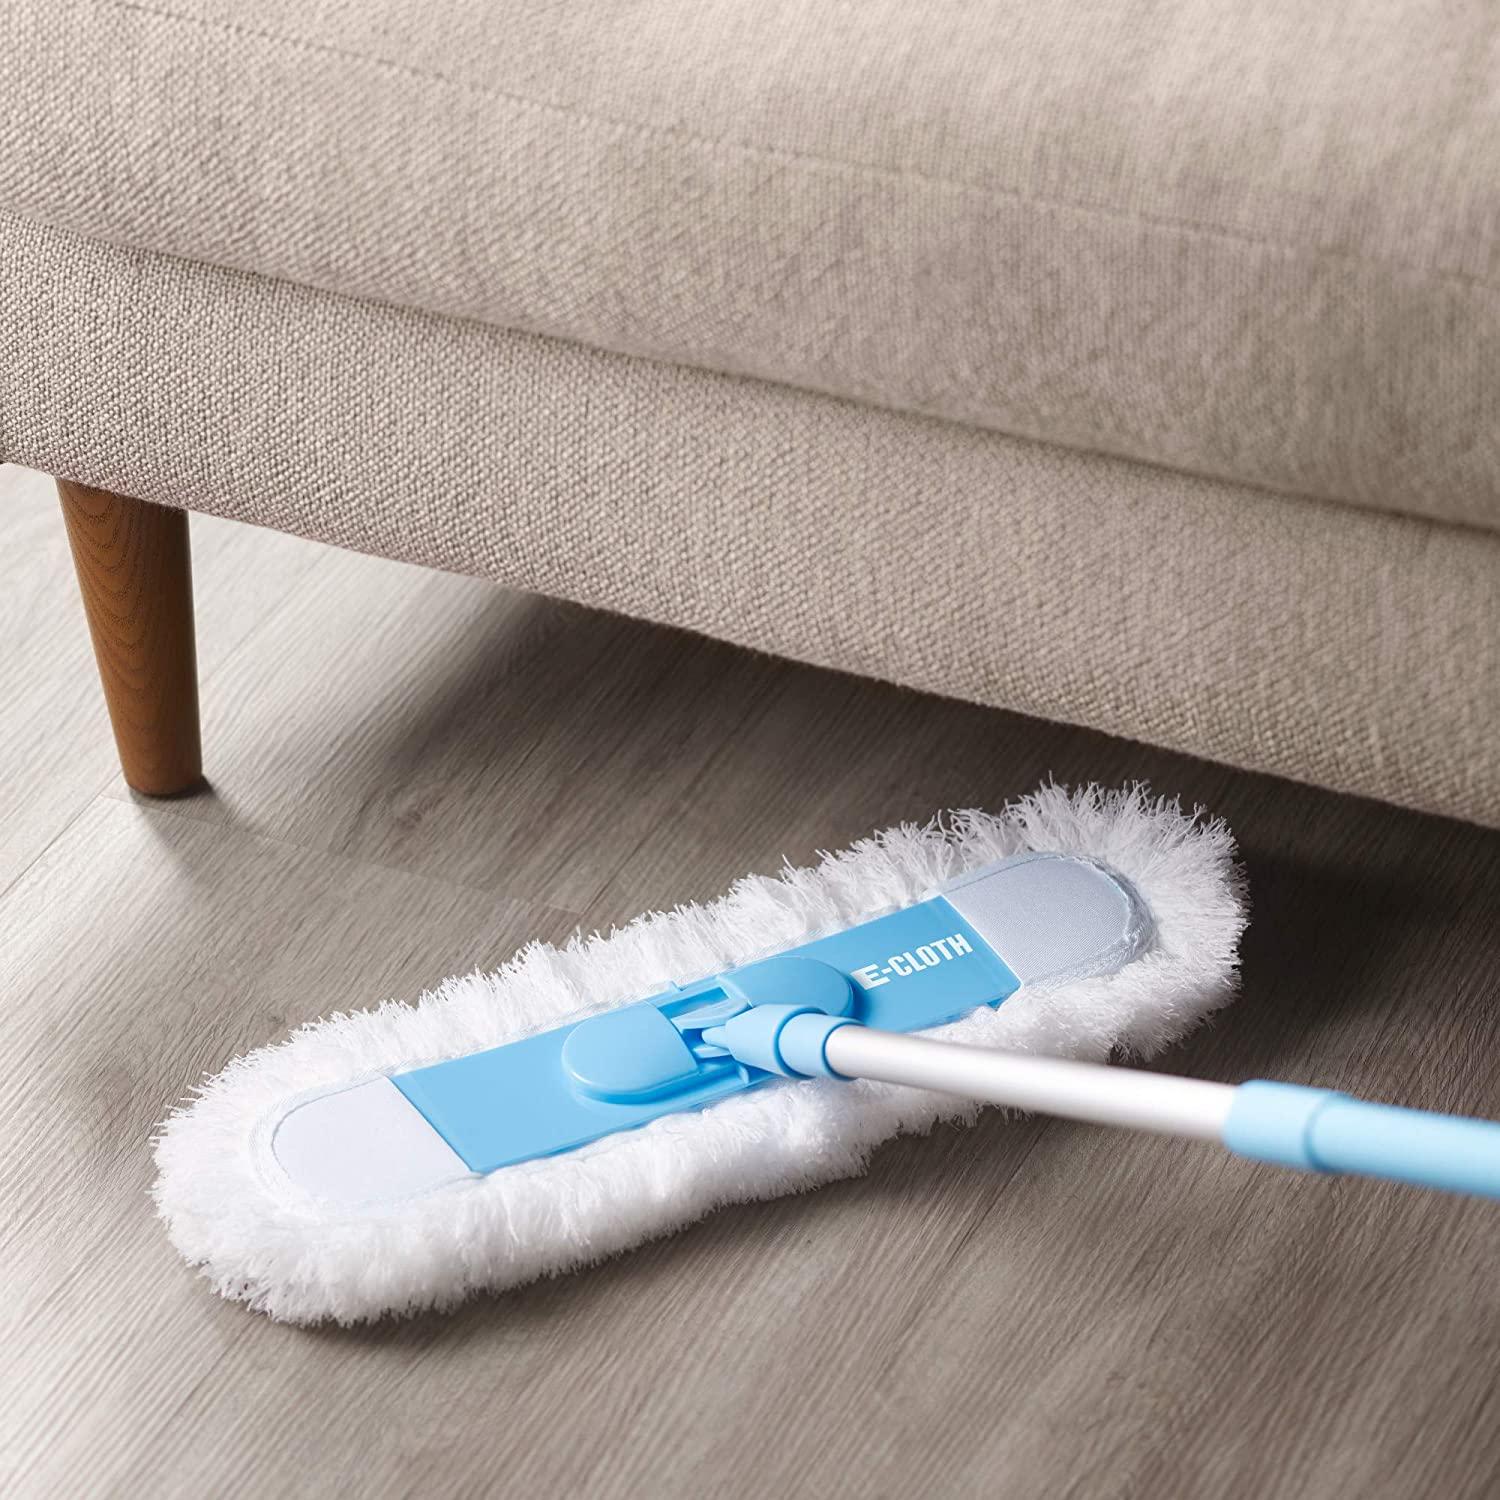 E-Cloth Flexi-Edge Floor & Wall Duster, Reusable Dusting Mop for Floor  Cleaning, Floor Cleaner Ideal for Harword, Tile, Laminate and Other Hard  Surfaces, 100 Wash Guarantee, 1 Pack Blue and Silver Old